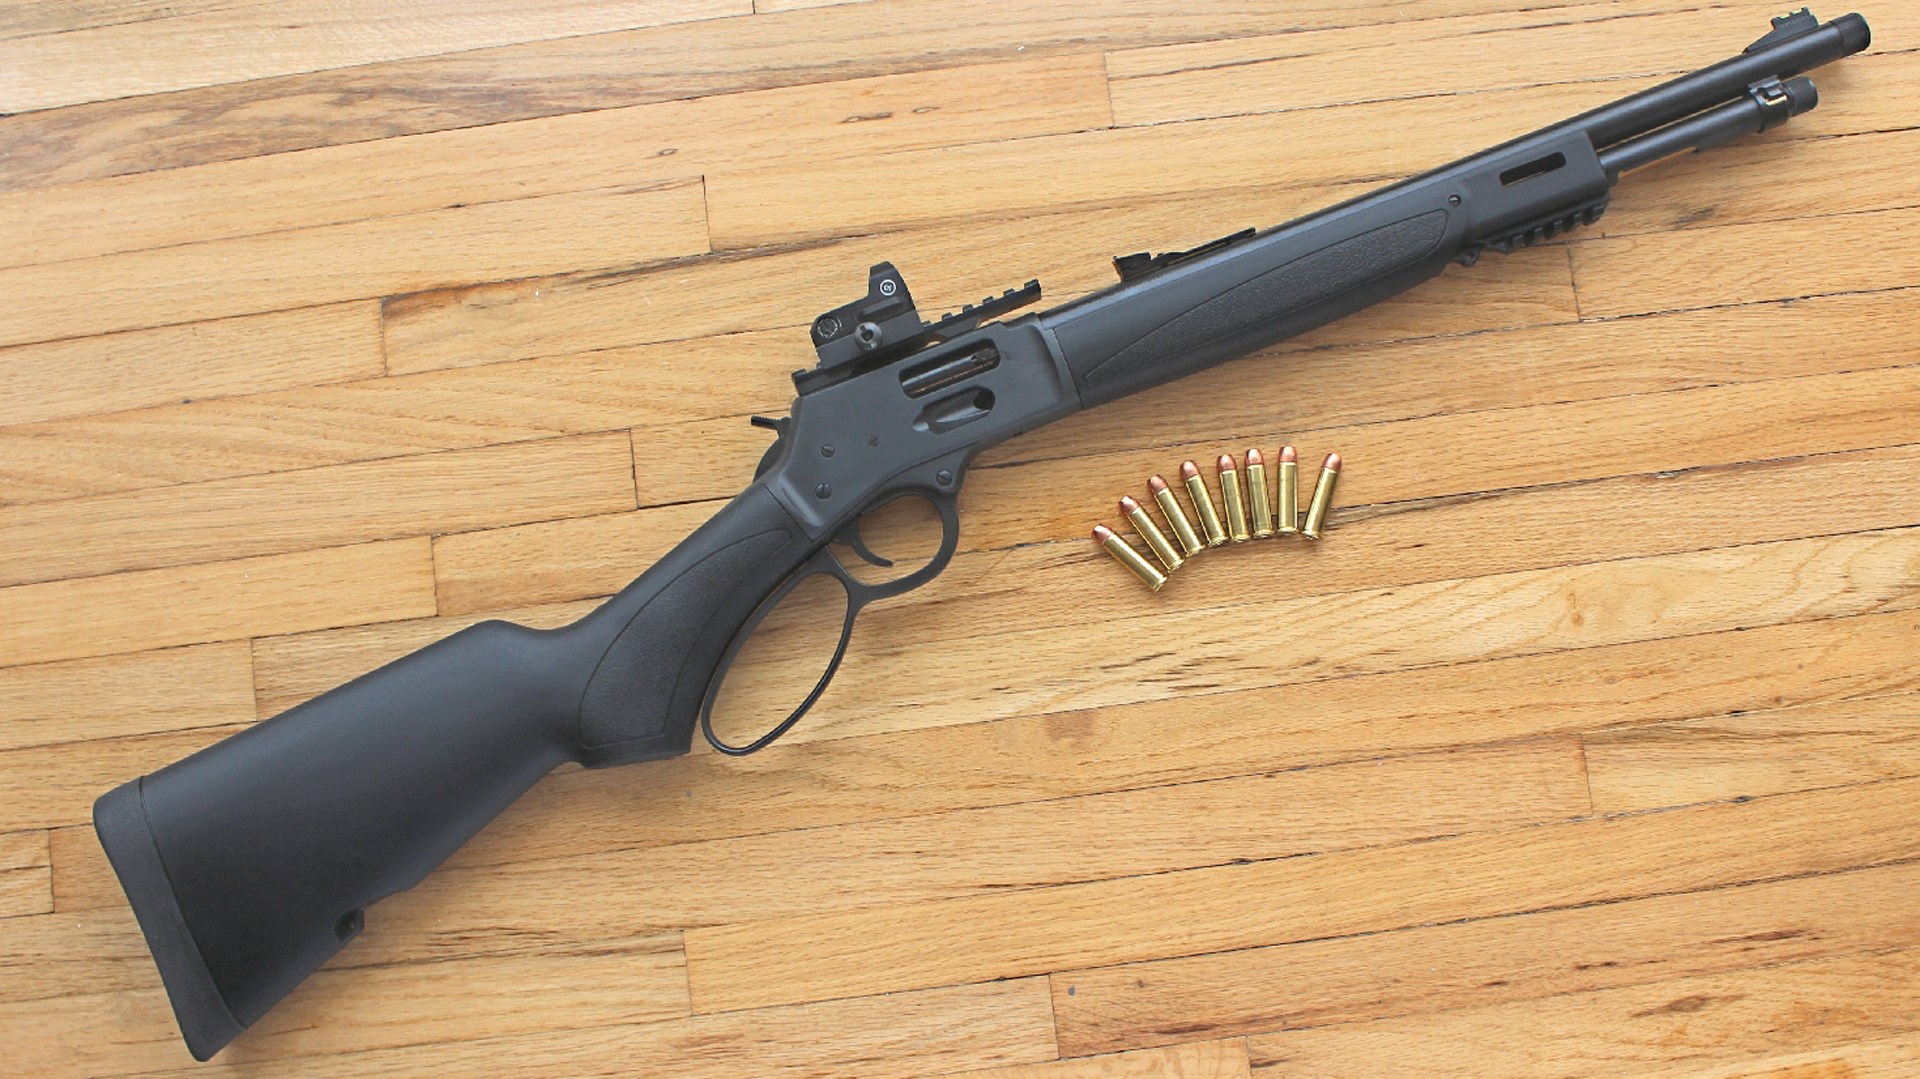 Henry Repeating Arms Lever-Action black-colored rifle with red-dot optic mounted on Picatinny rail shown on wood floor with ammunition